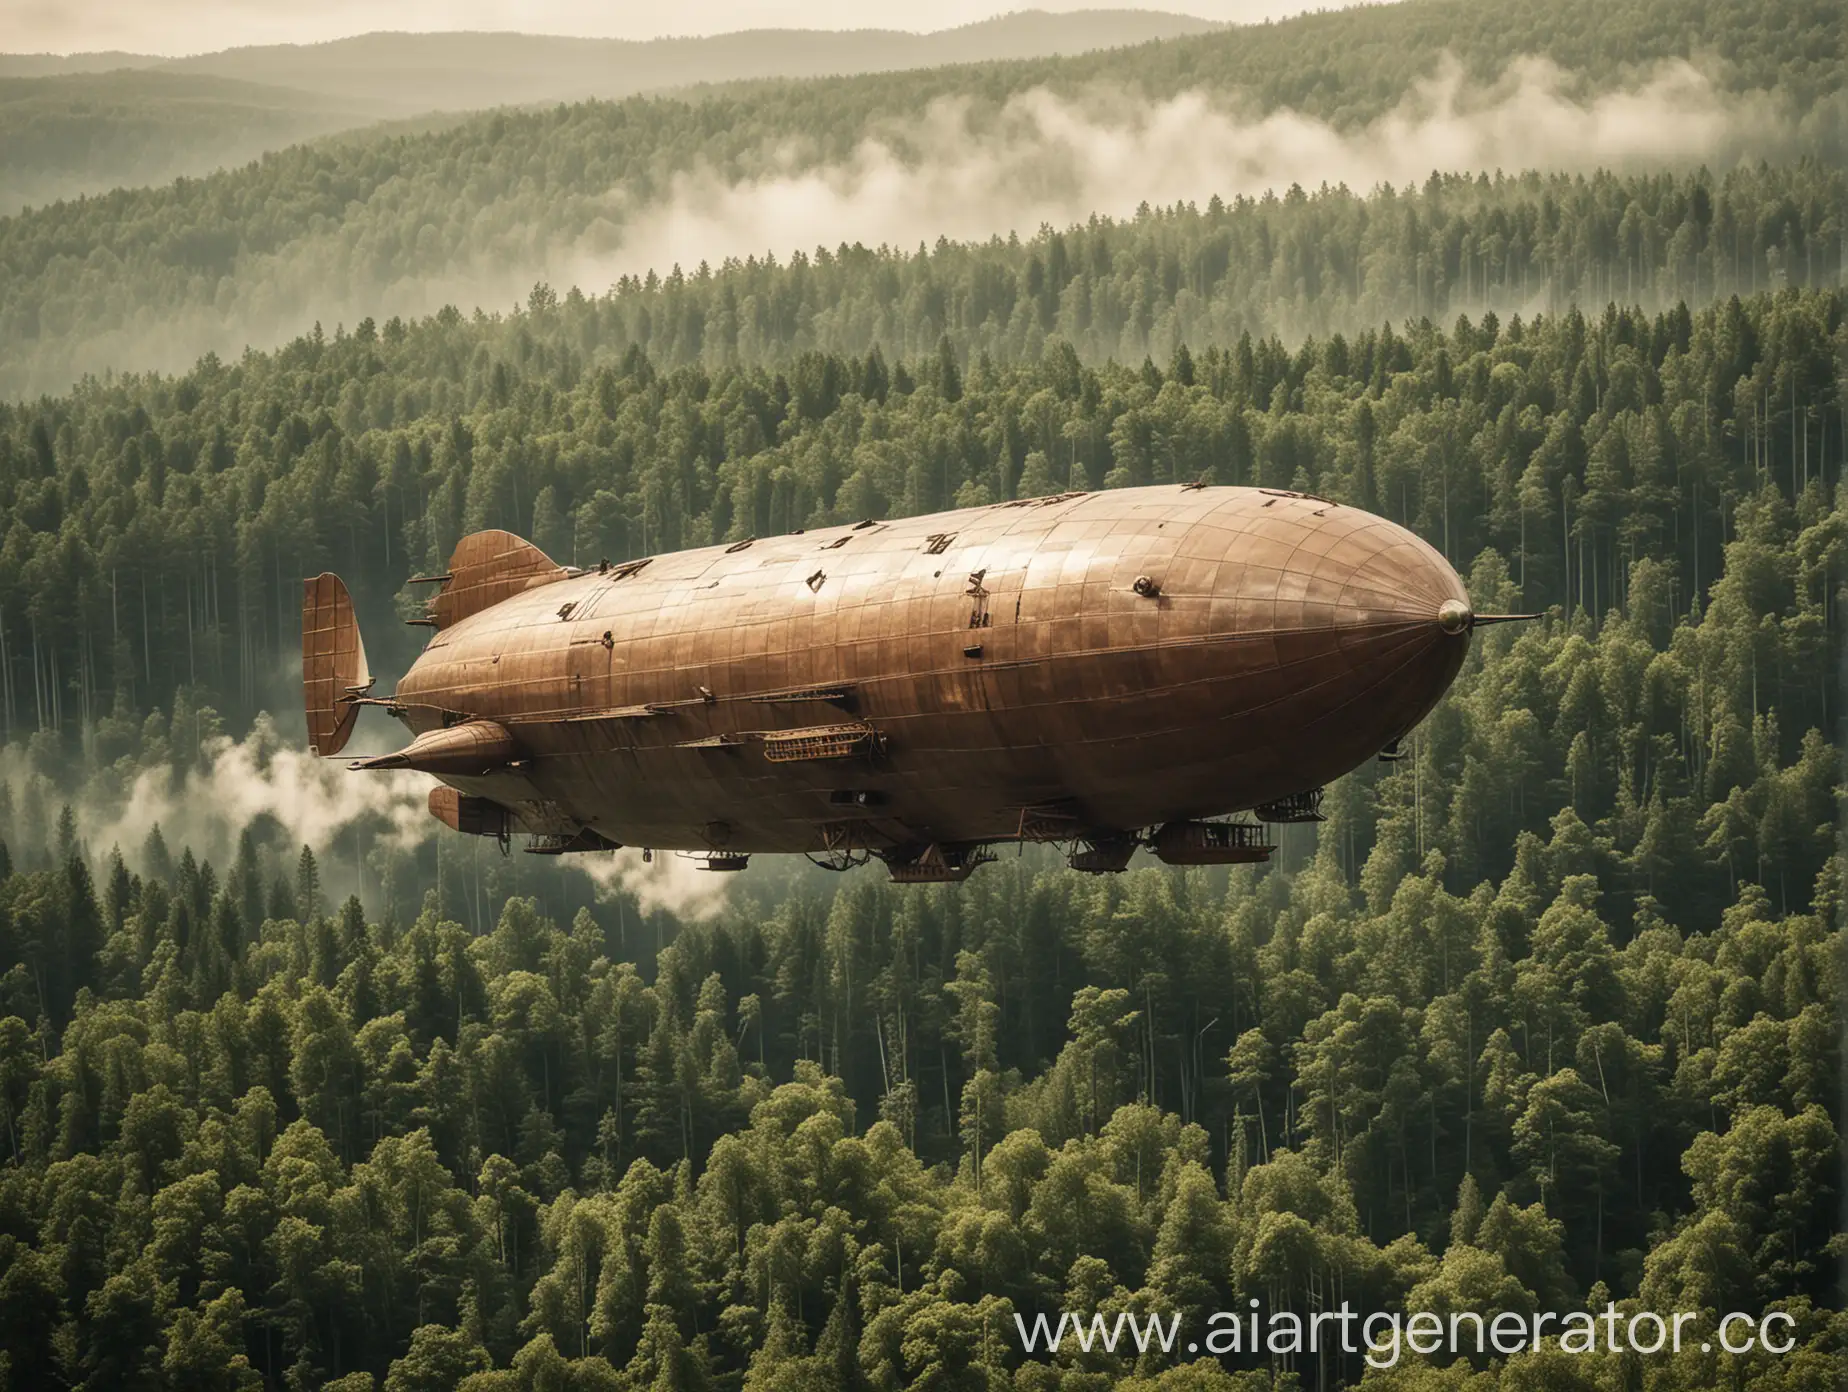 Airship-Flying-Over-Enchanted-Forest-Landscape-Fantasy-Photography-Collection